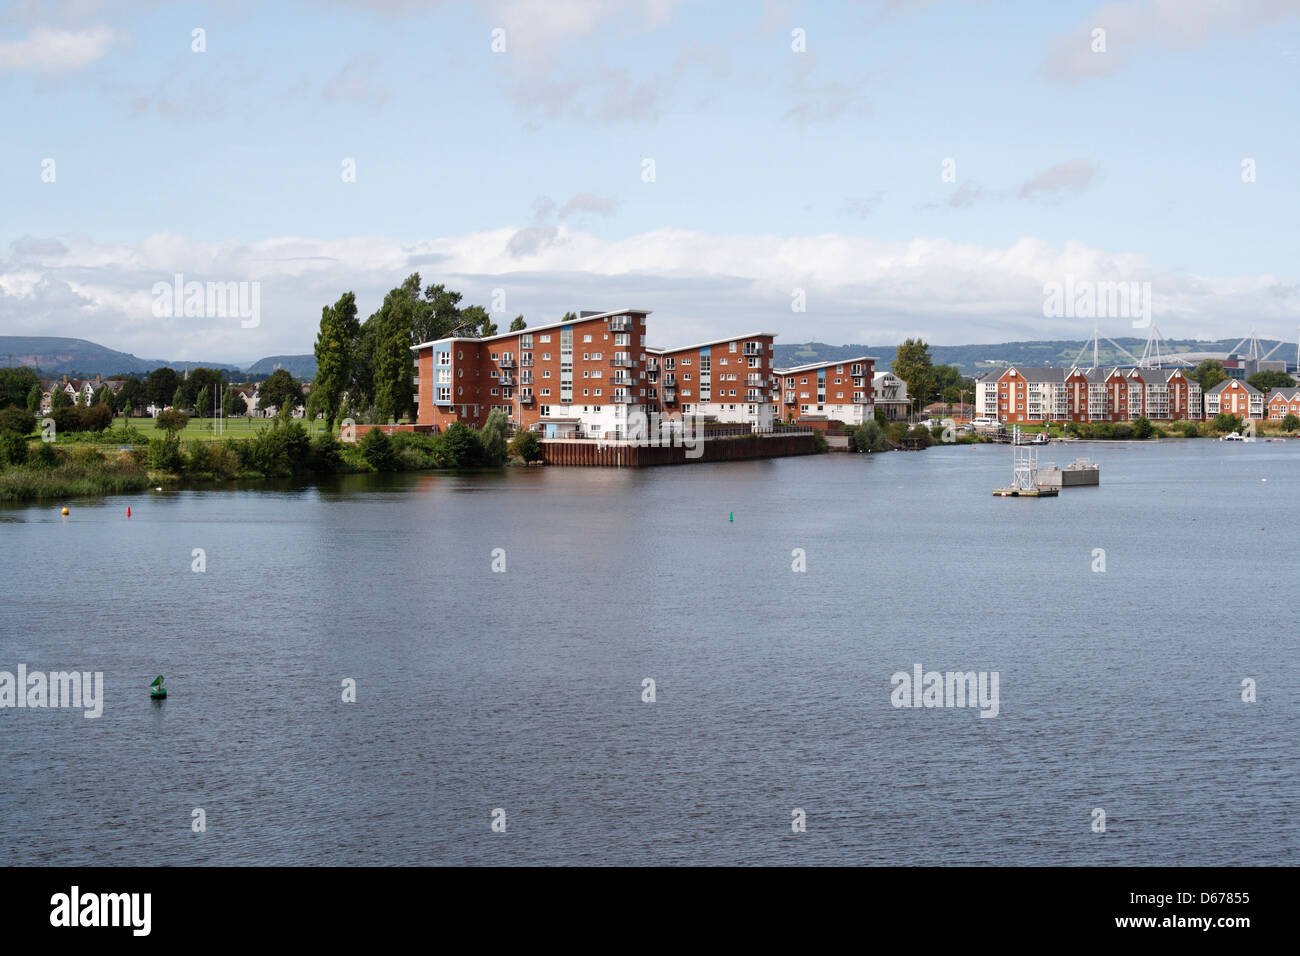 Riverside Housing in Cardiff bay overlooking the River Taff, Wales UK Stock Photo